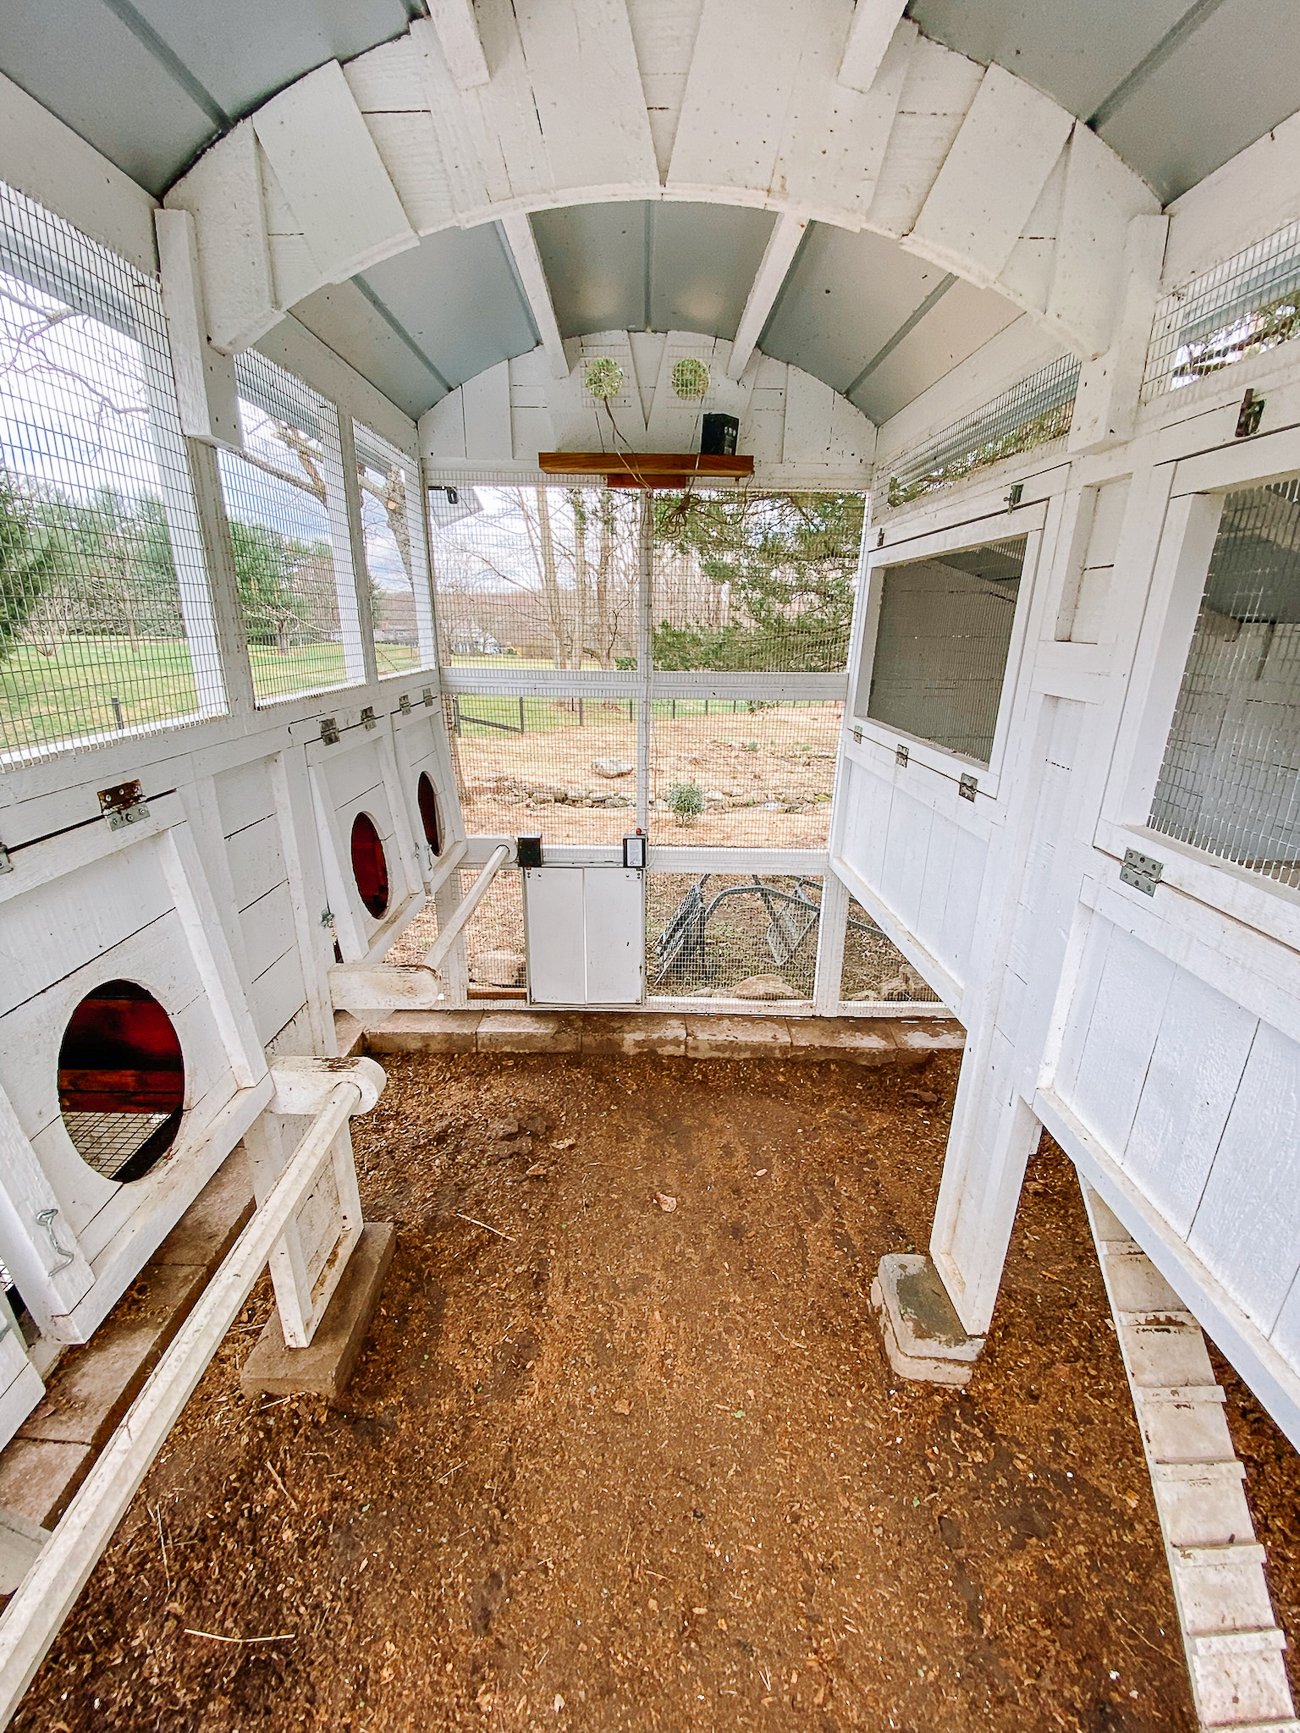 cleaned chicken coop